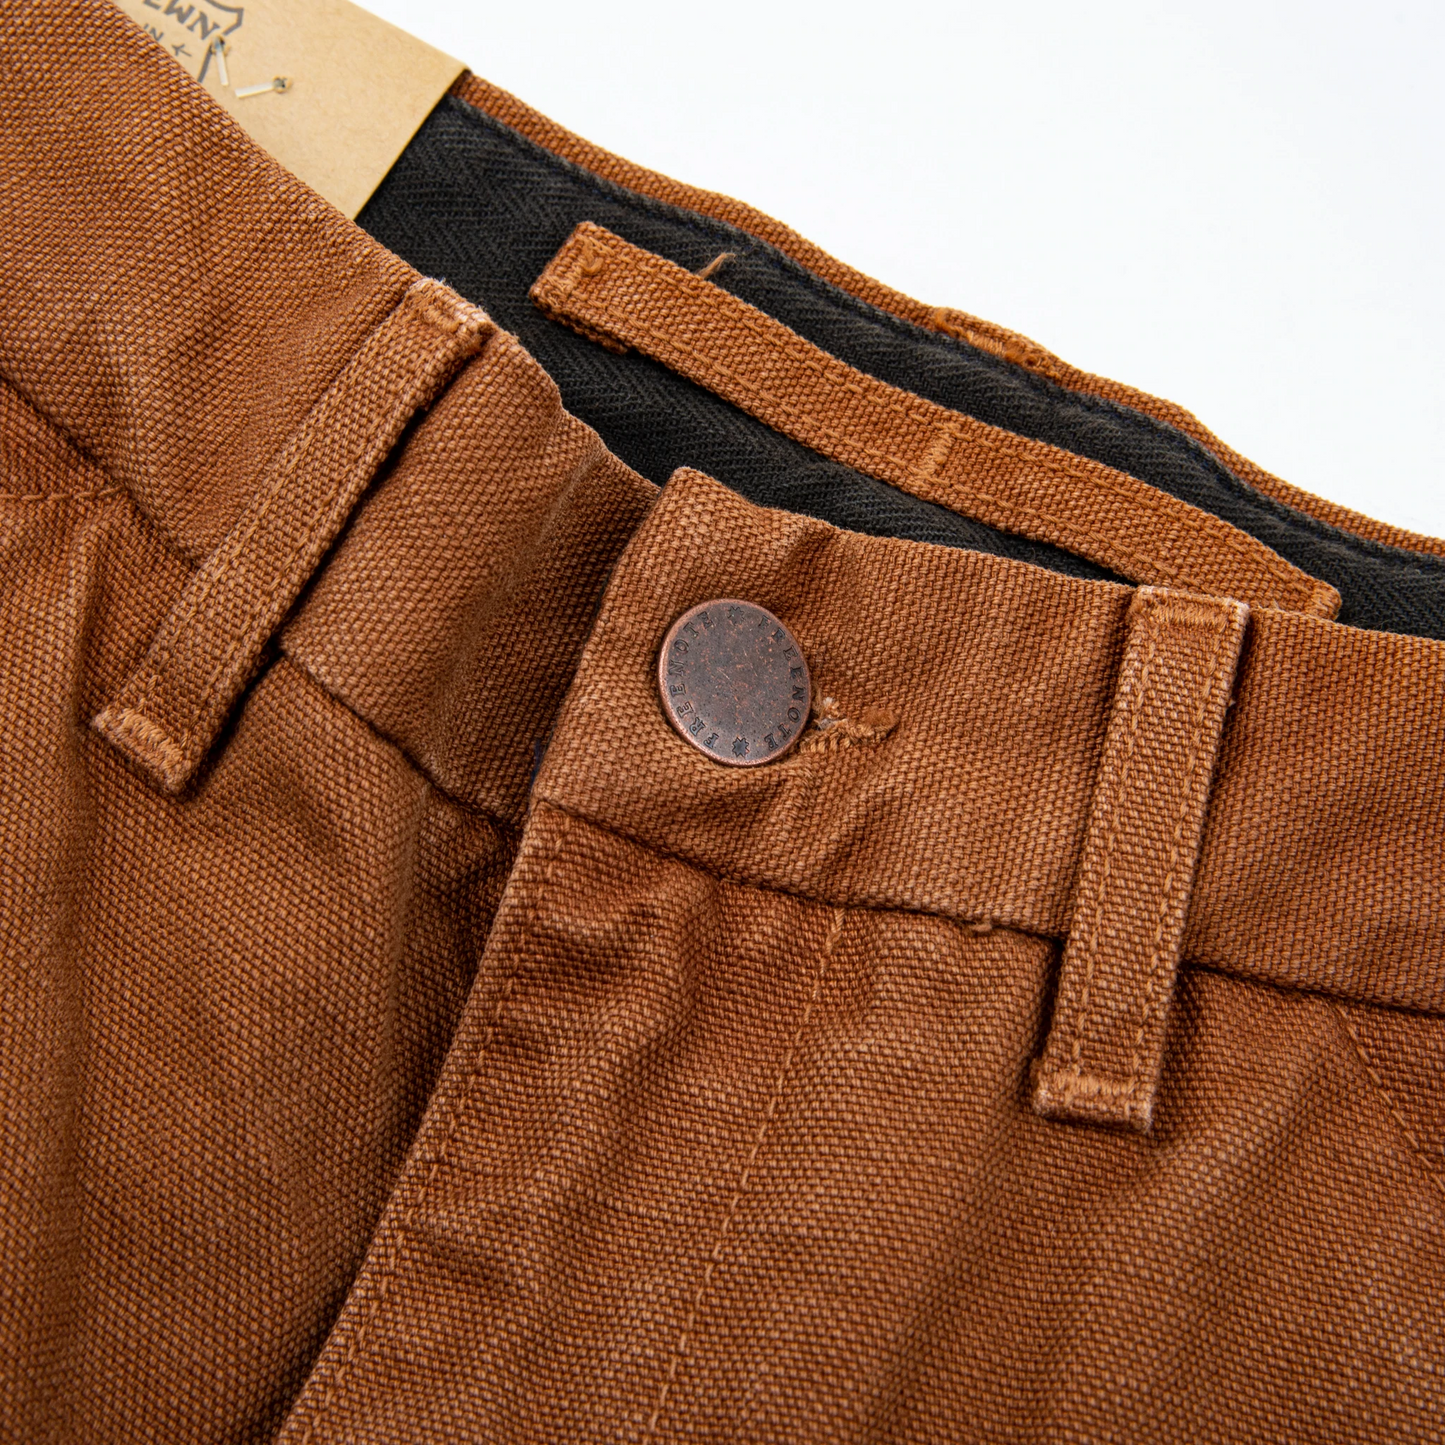 14oz Workers Chino in Rust